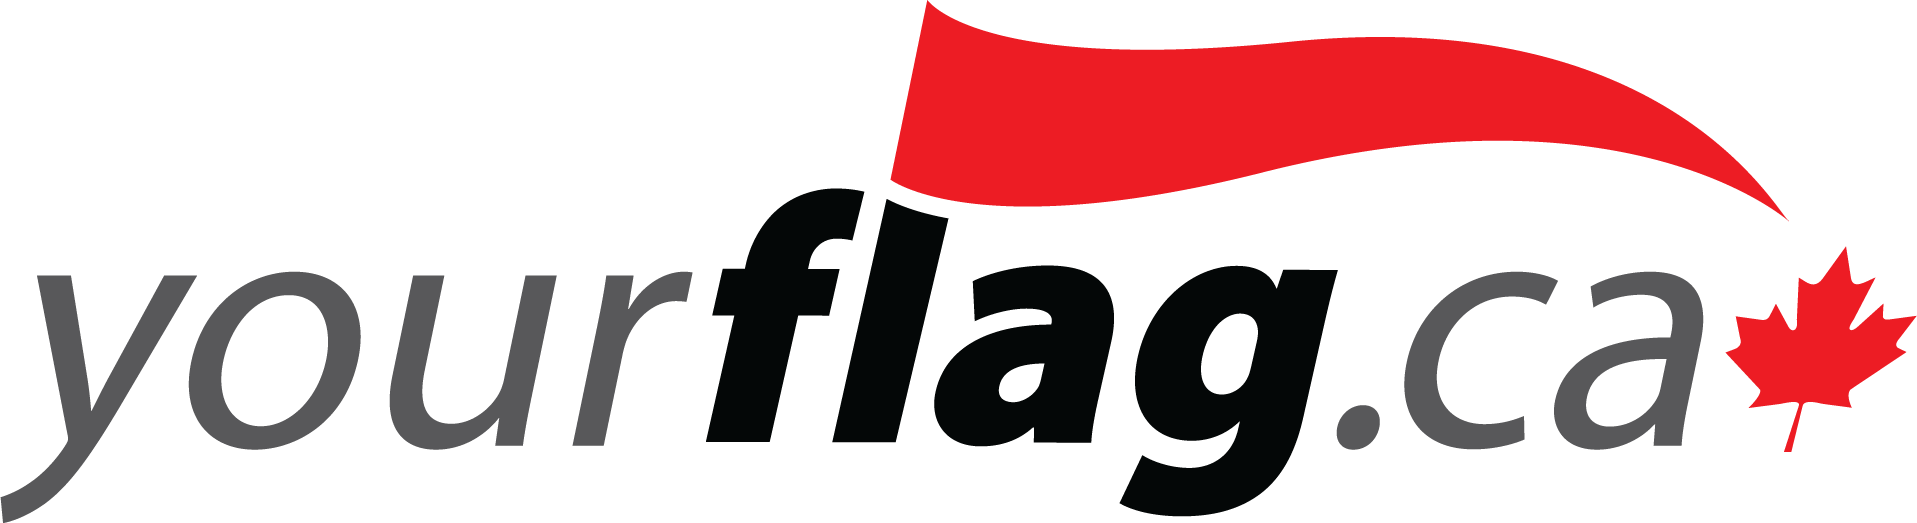 flags - 